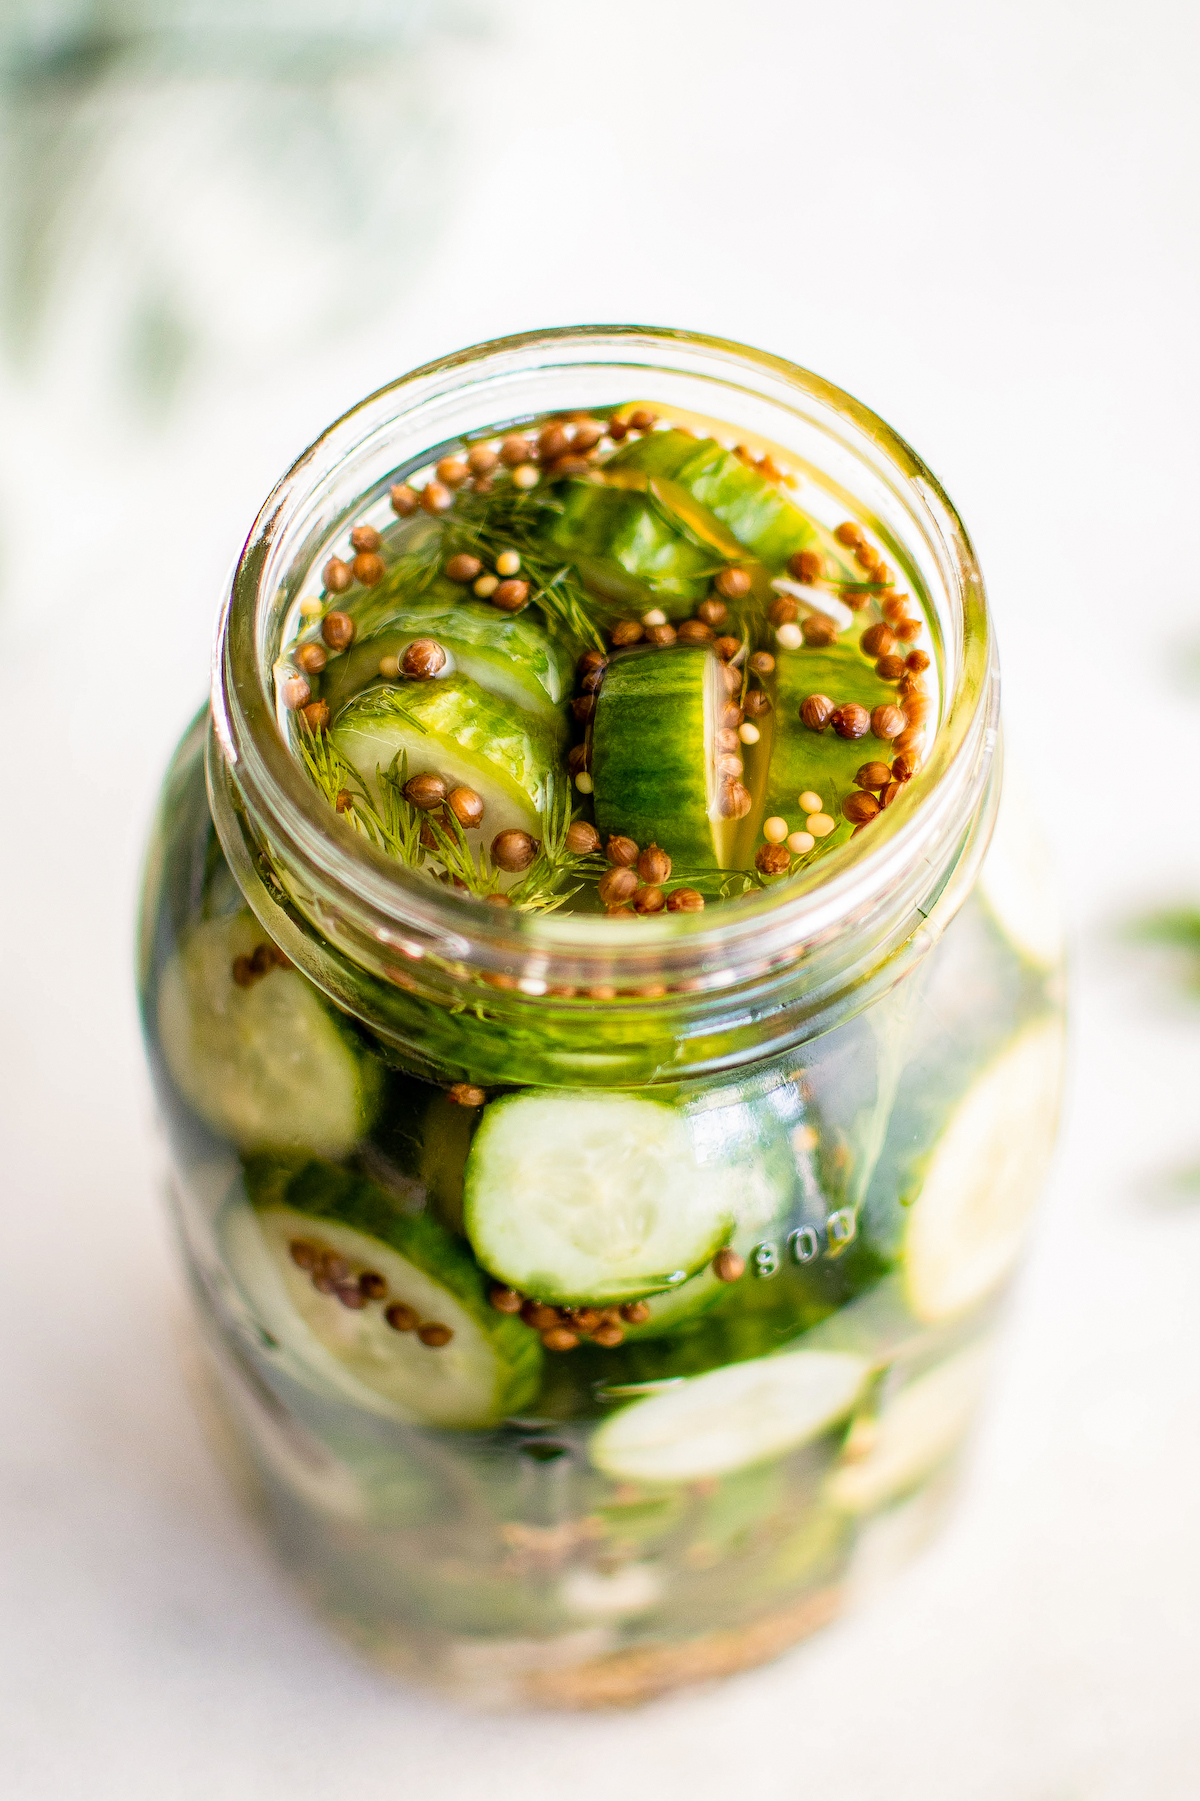 Close-up of refrigerator dill pickles in the jar with dill, mustard and coriander seeds floating on top.